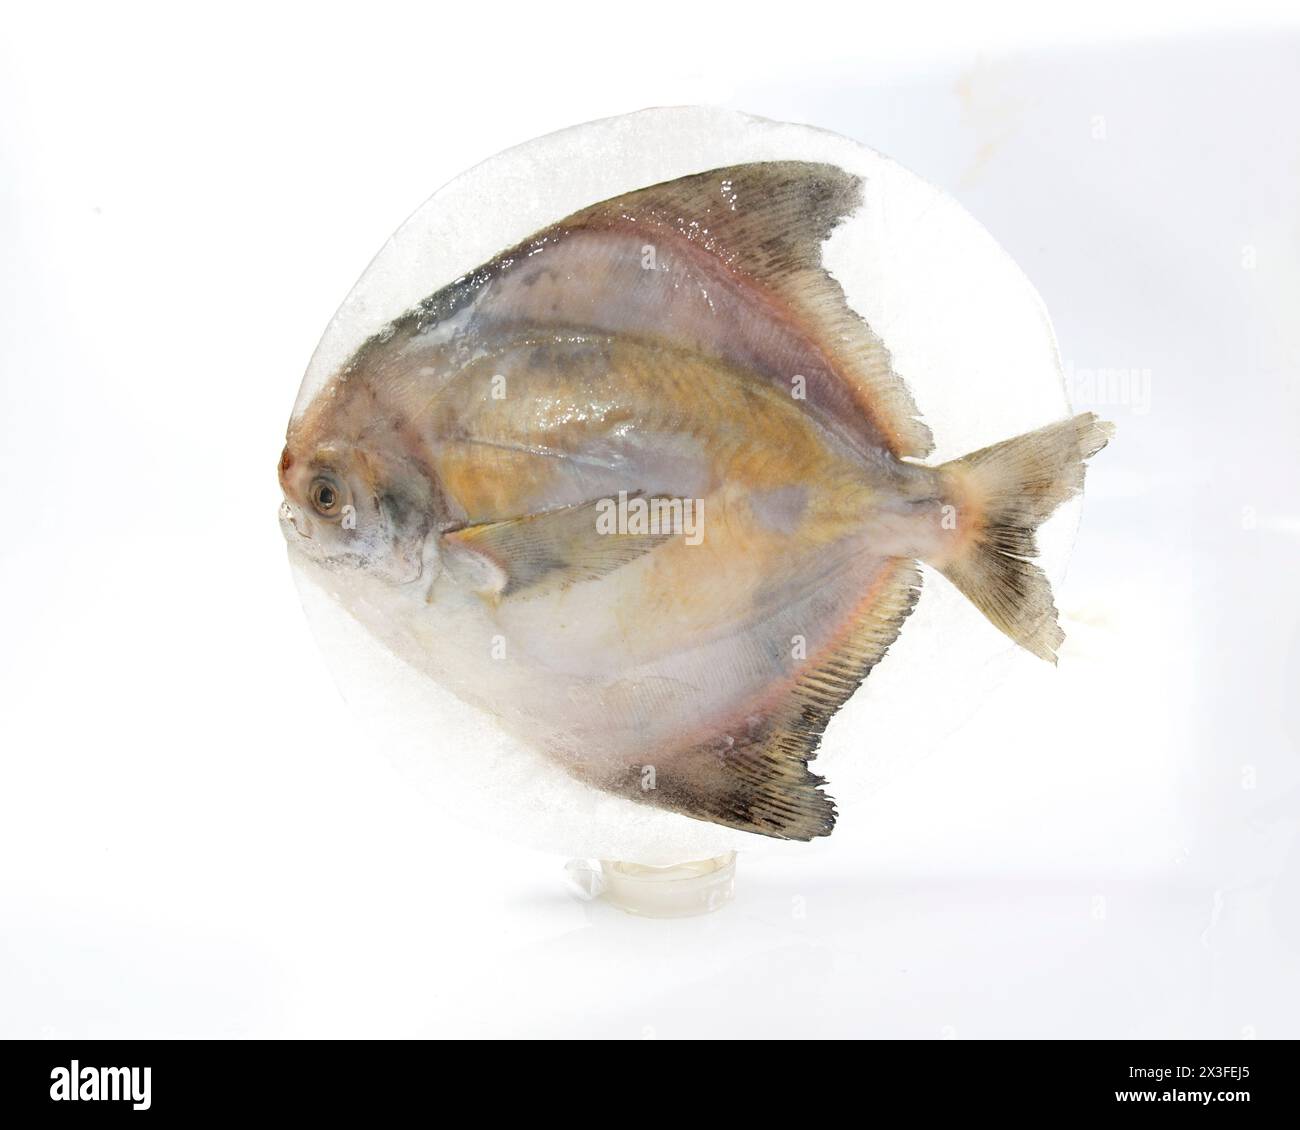 Silver pomfret covered in a piece of ice, after long time kept in freezer. not so fresh. Stock Photo